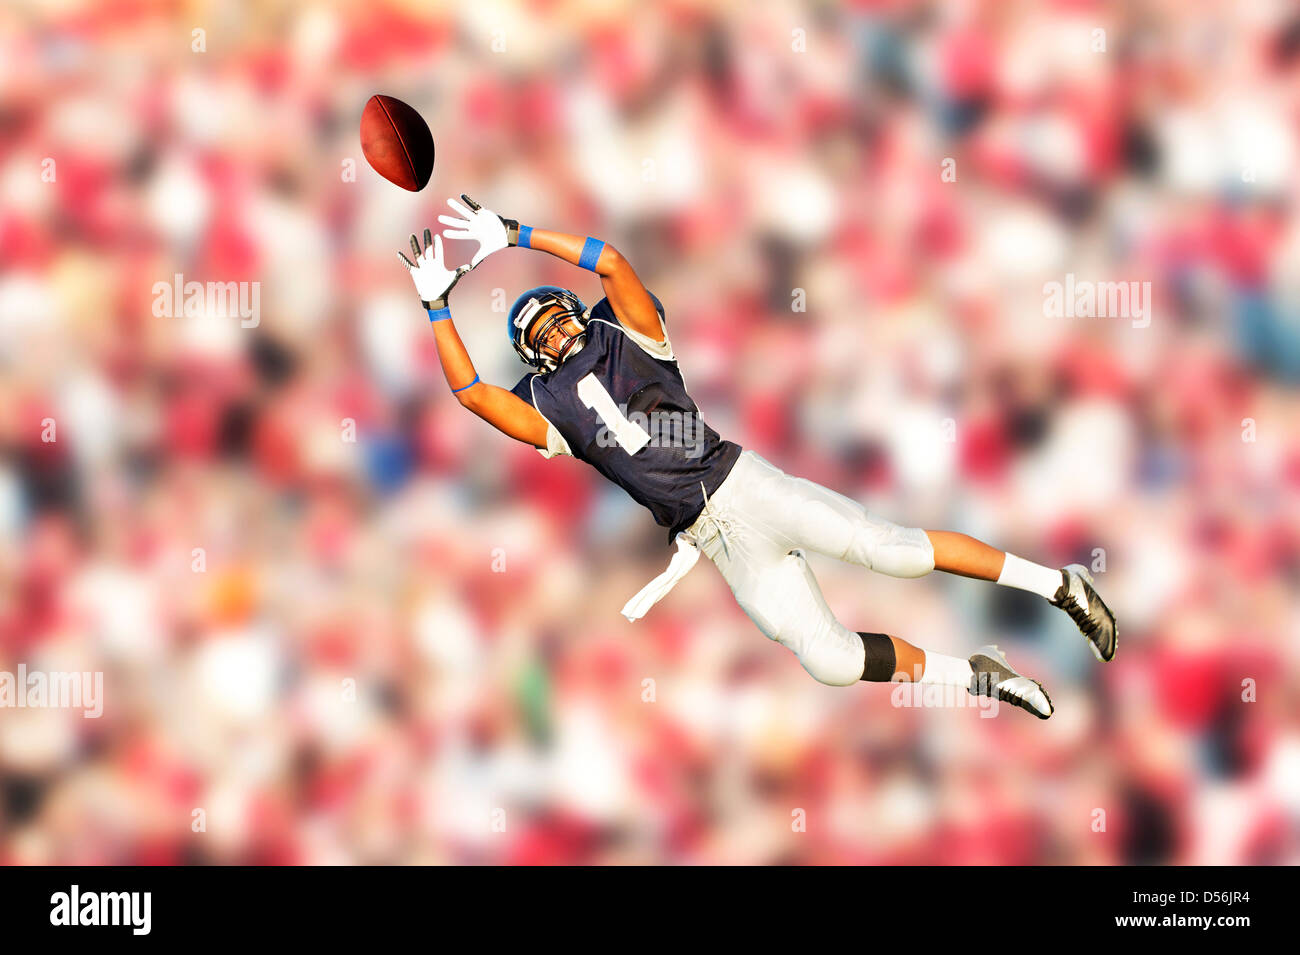 African American football player catching ball Stock Photo